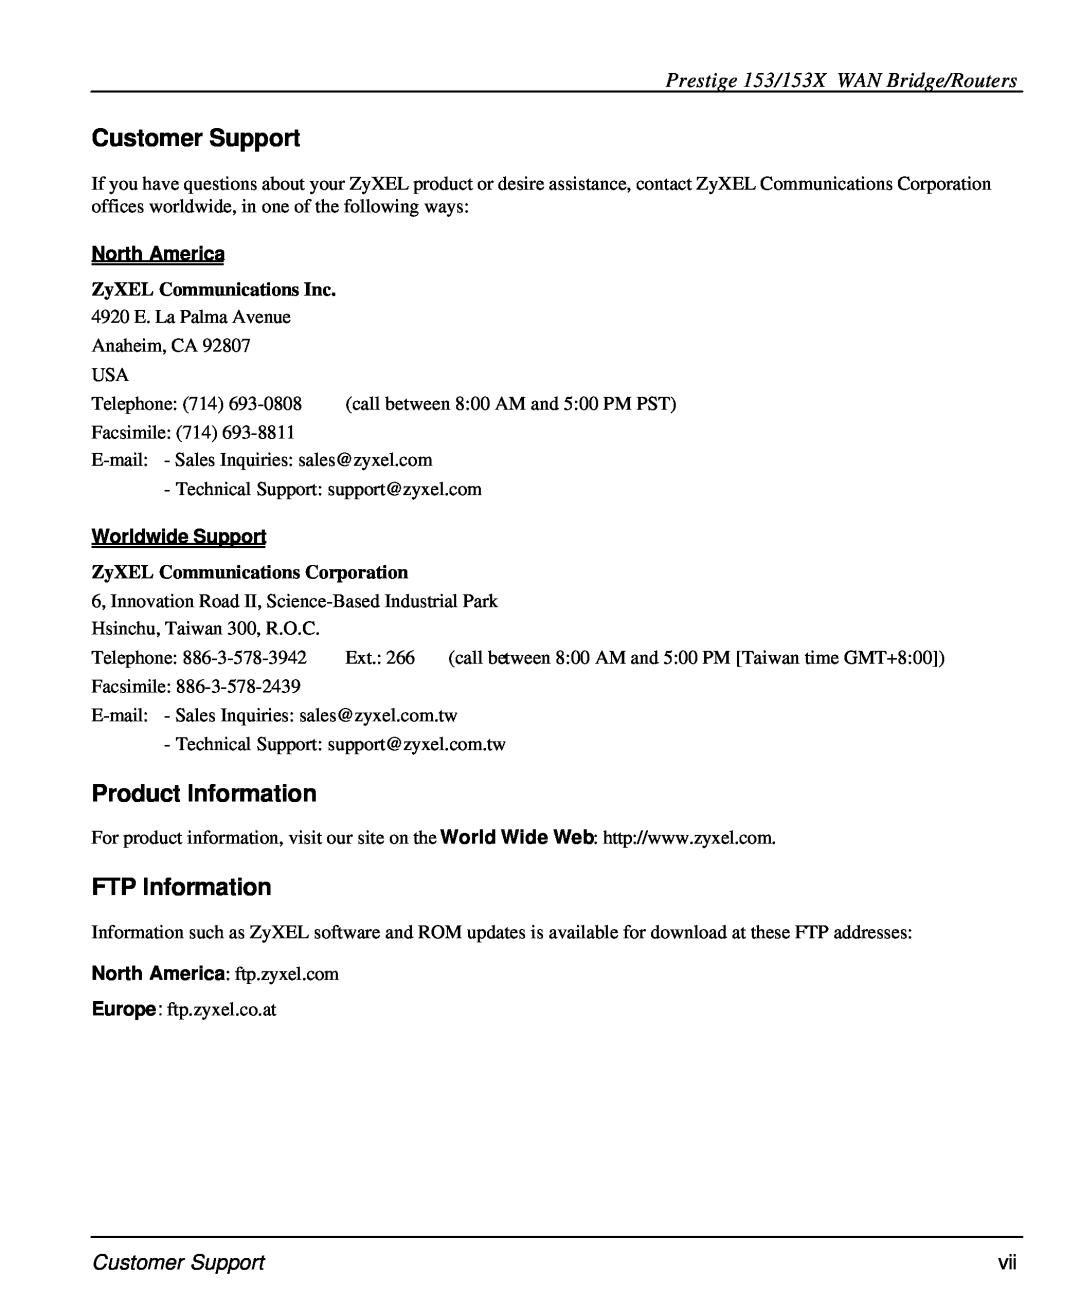 ZyXEL Communications Customer Support, Product Information, FTP Information, Prestige 153/153X WAN Bridge/Routers 